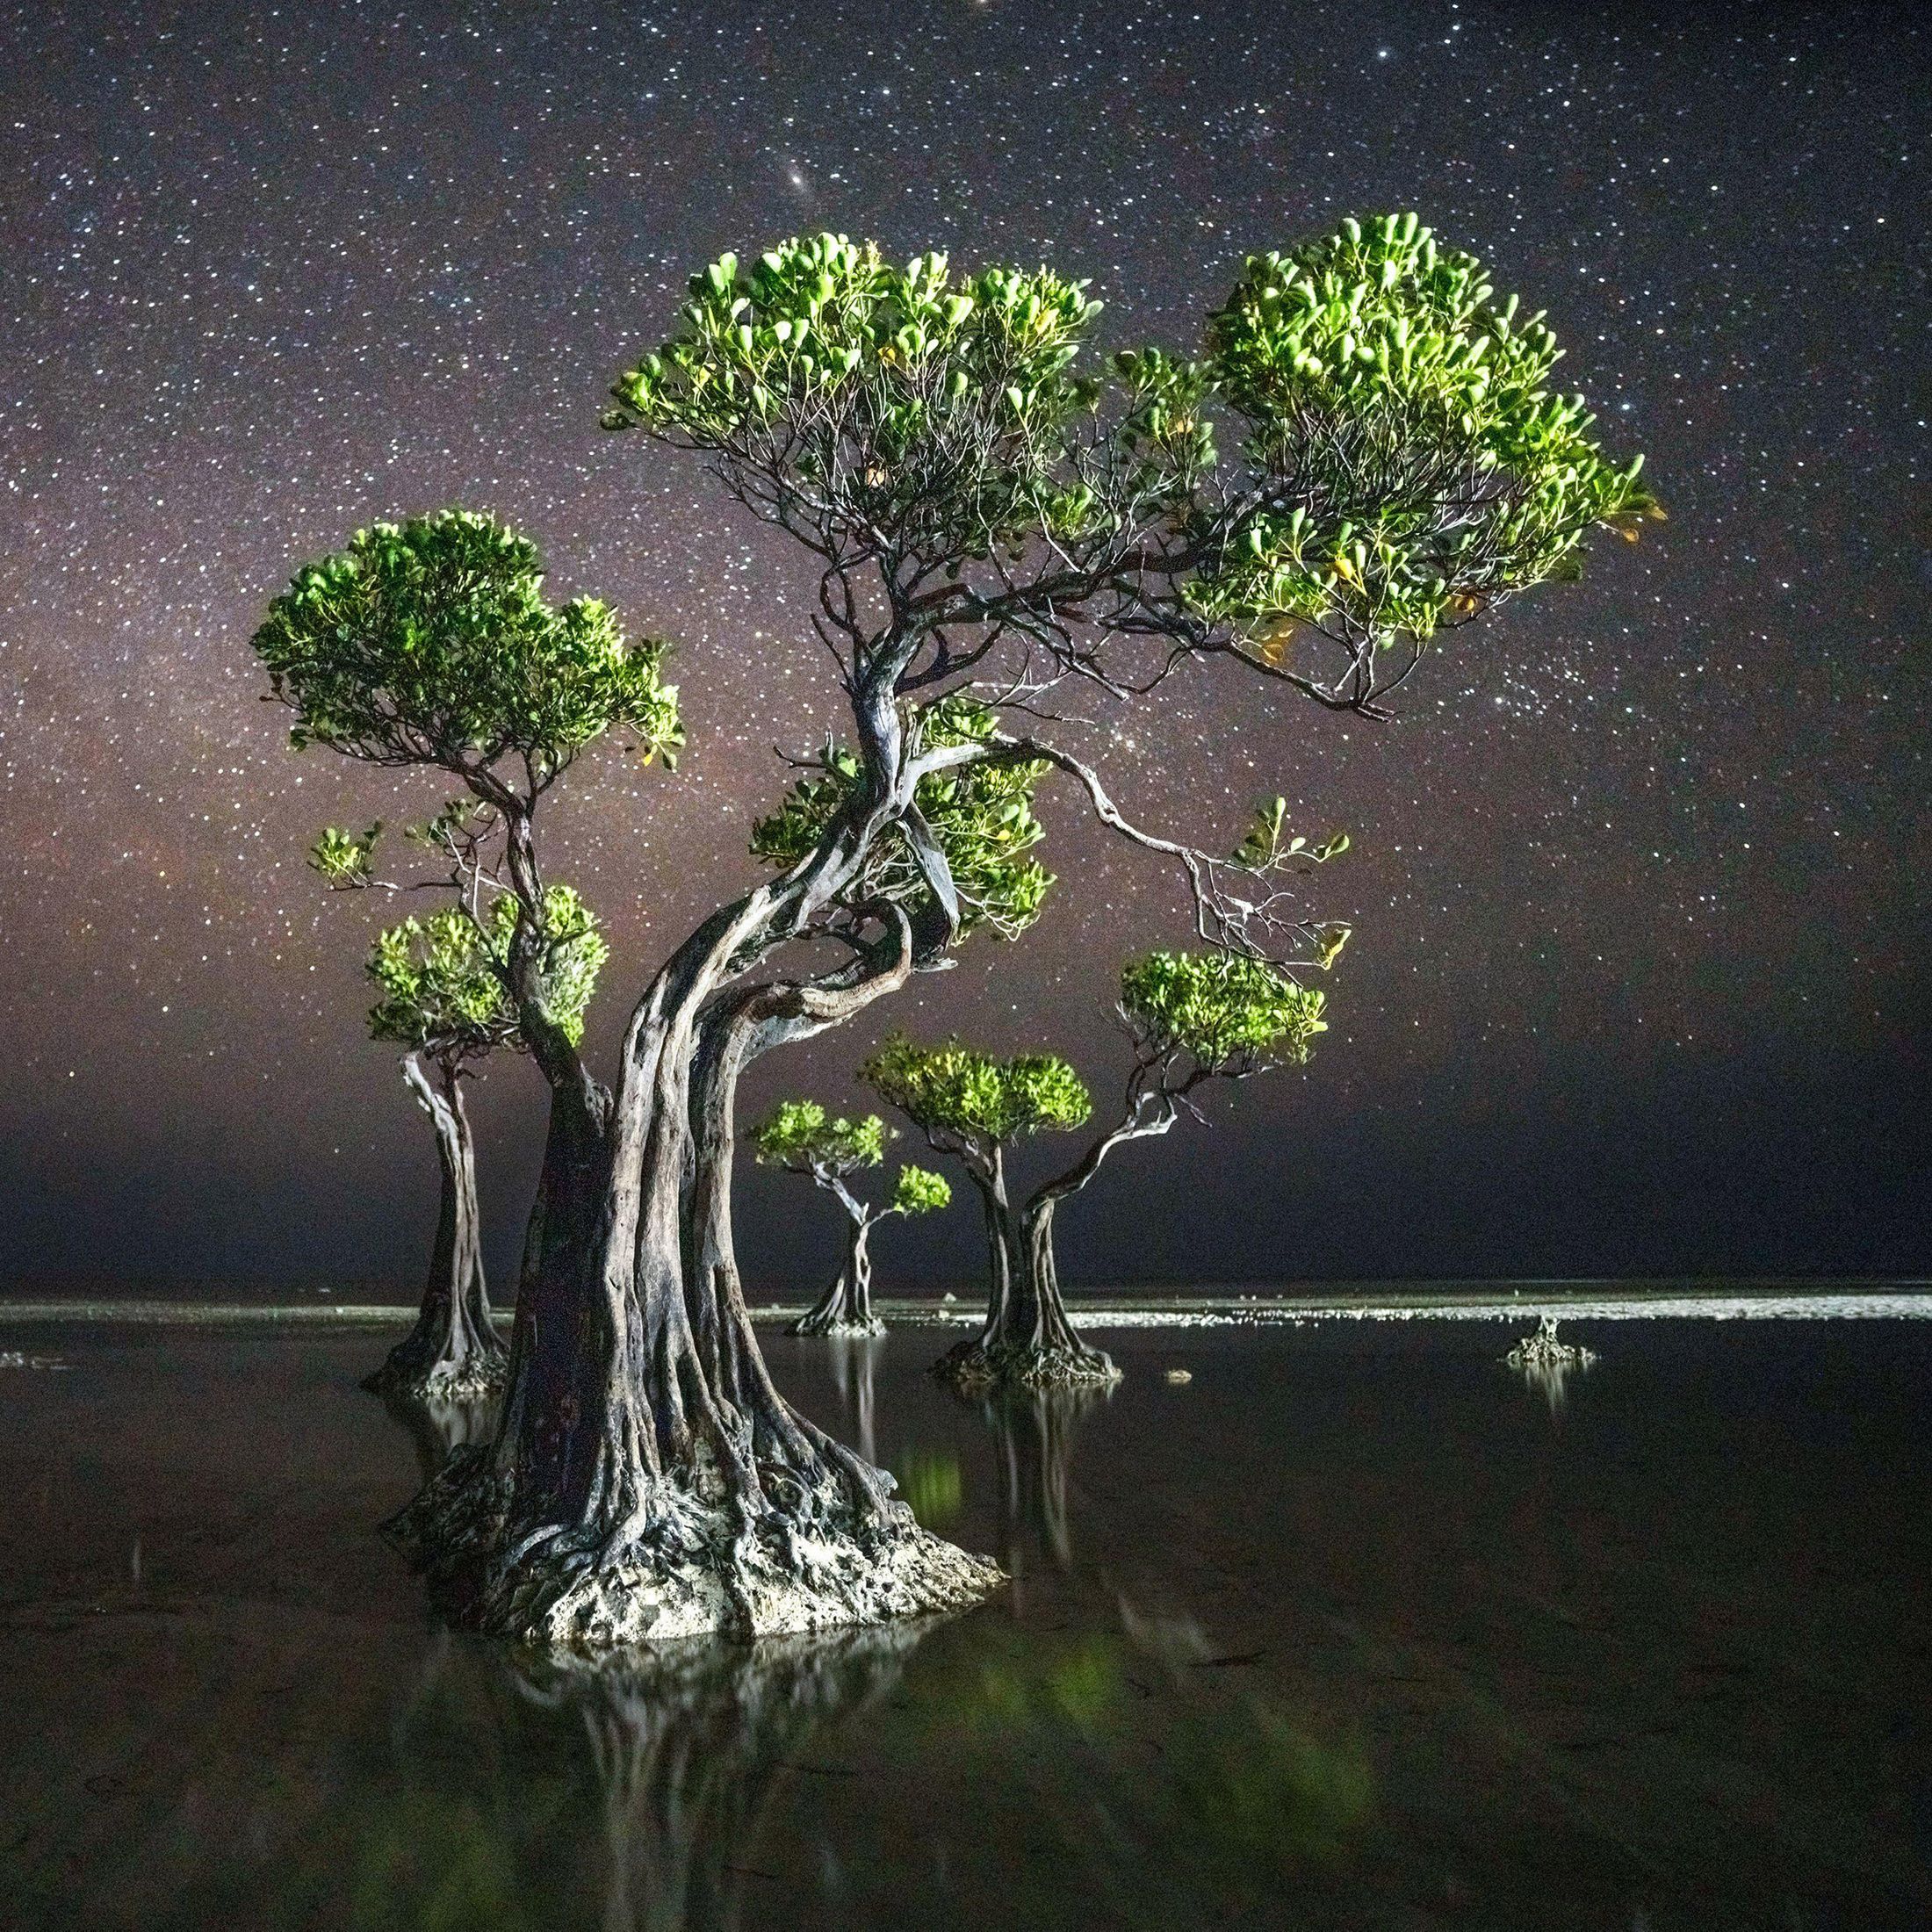 Nighttime photo of mangroves in water, with stars in the sky.